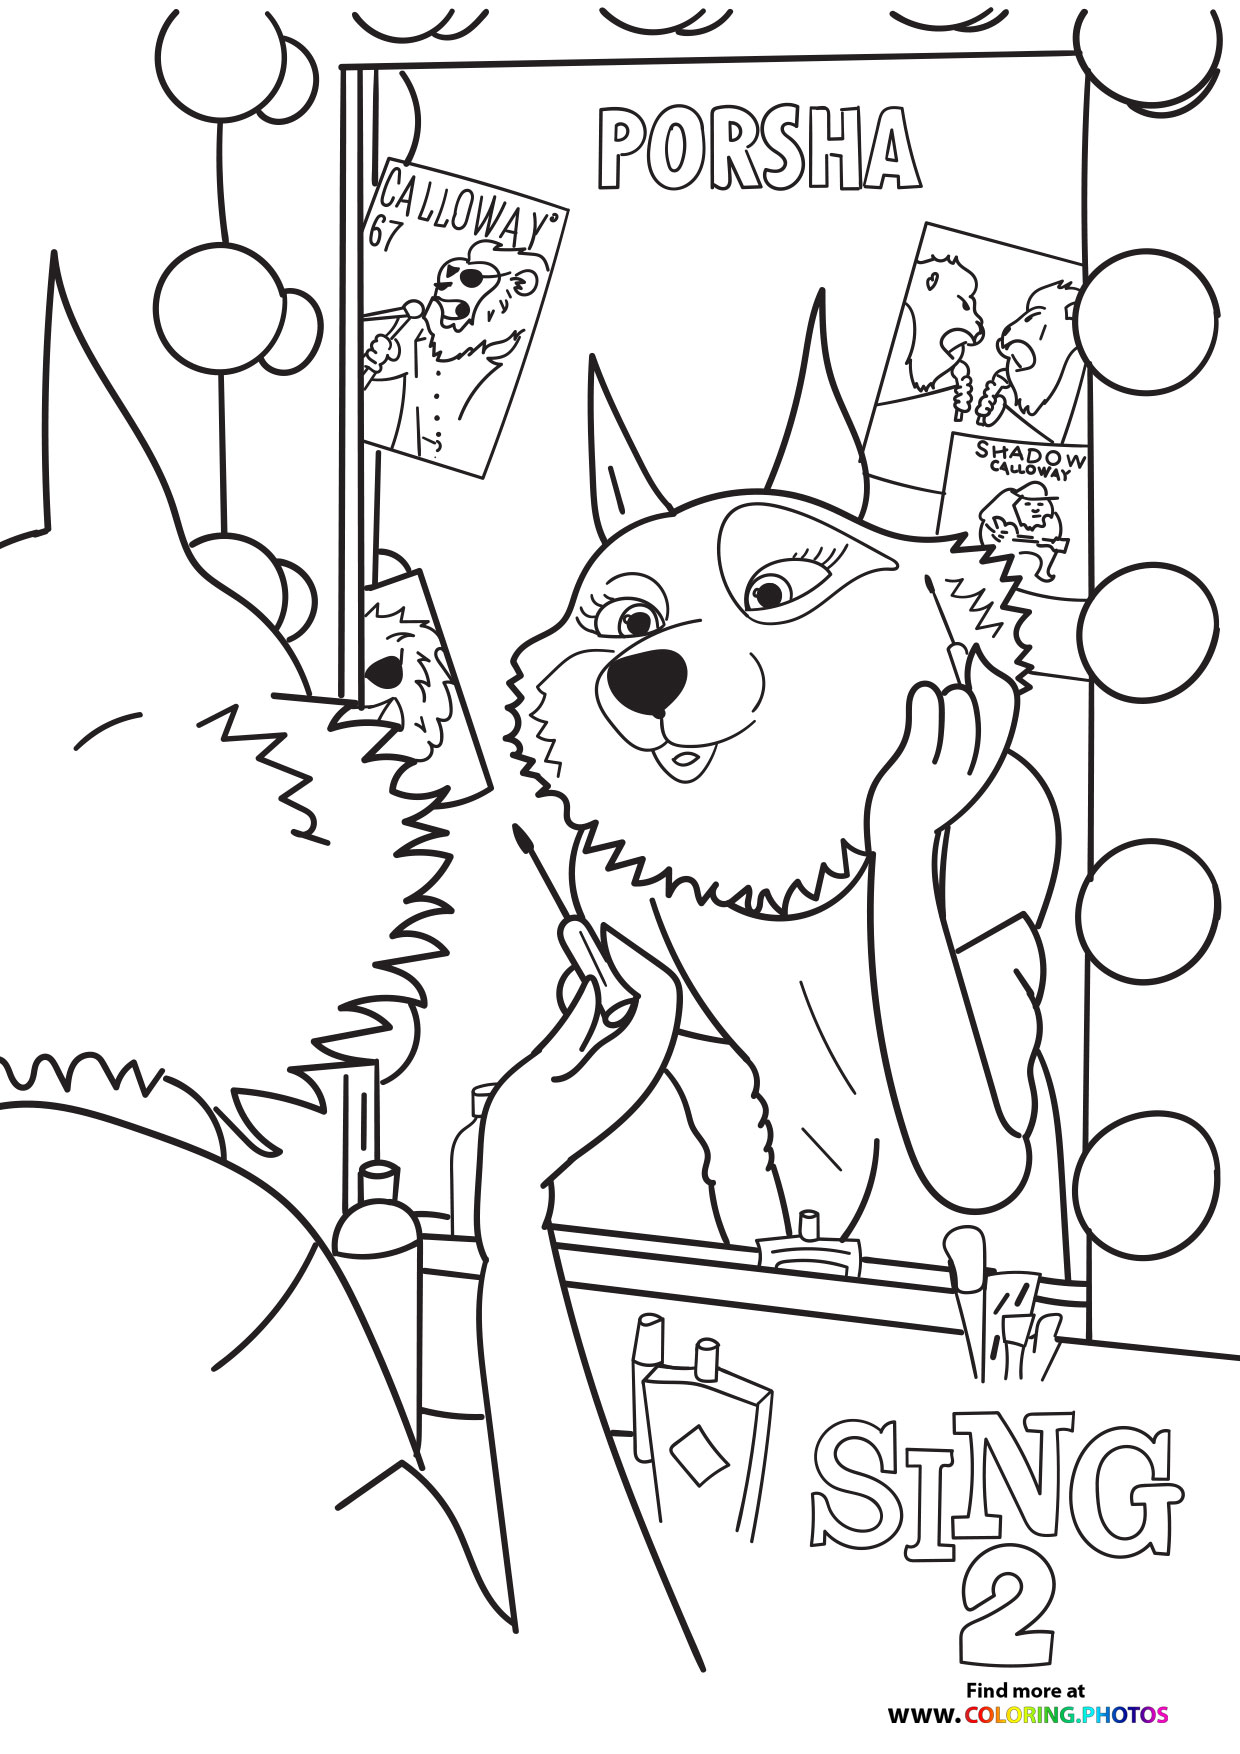 Porsha from Sing 2 - Coloring Pages for kids